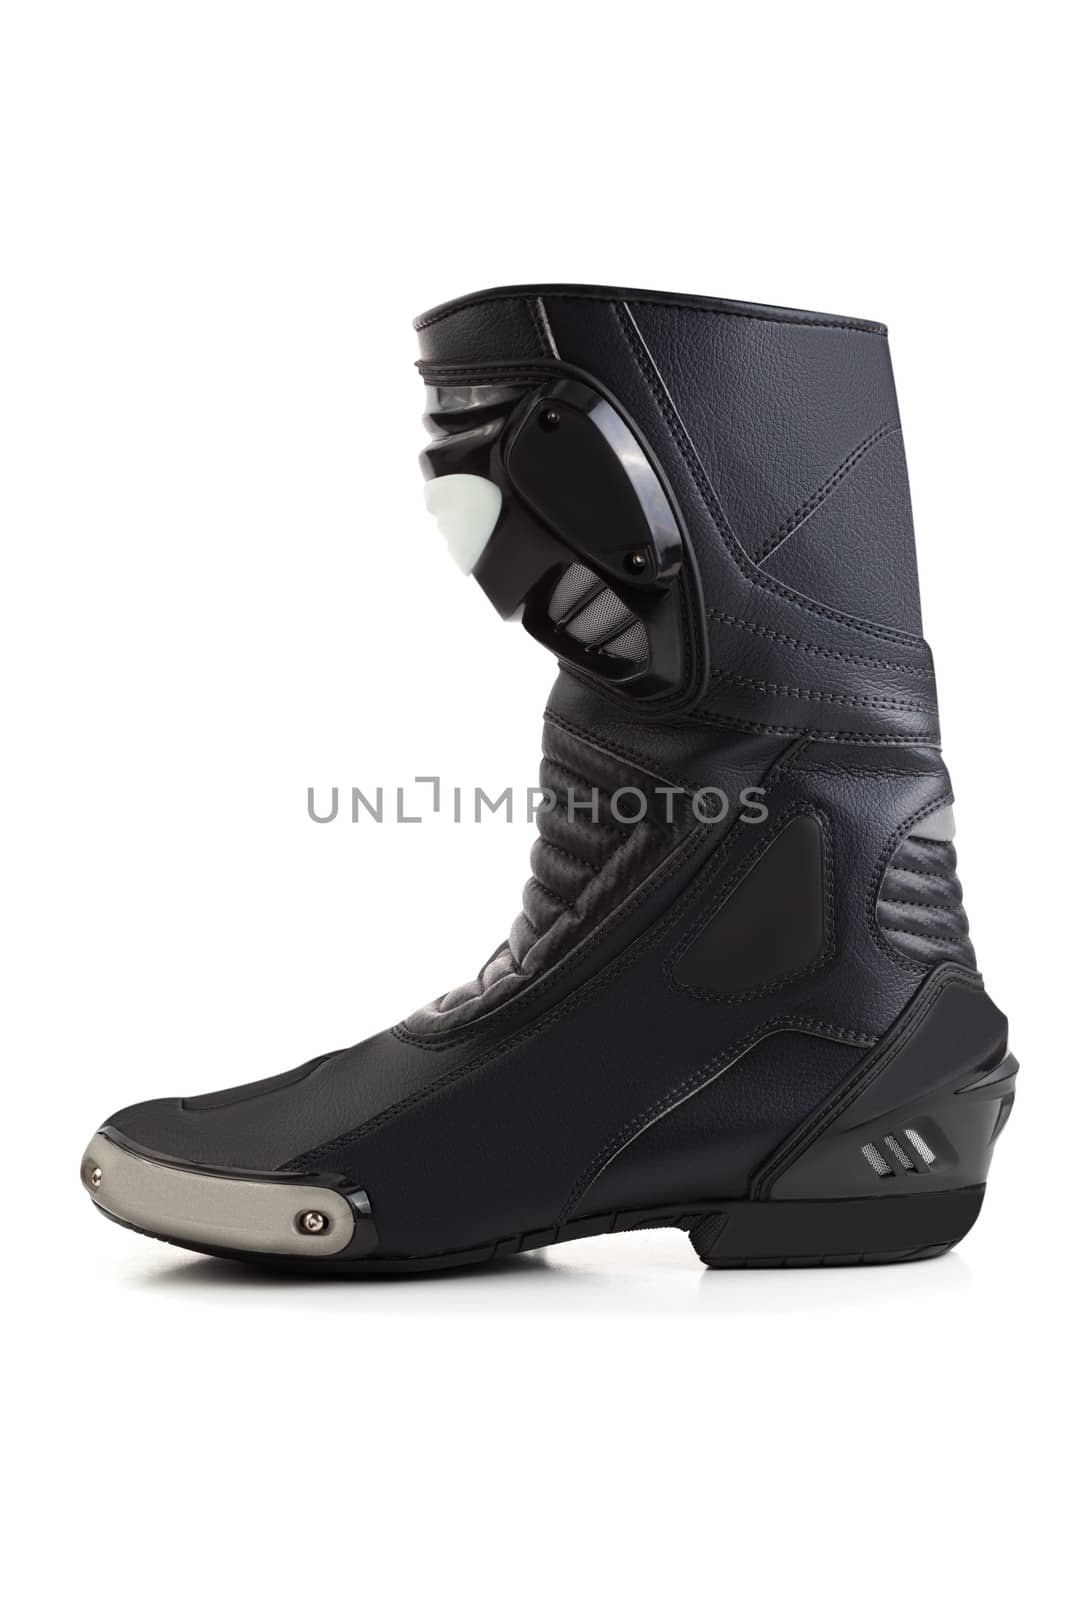 Black sportbike racing boot with carbon fiber isolated on white